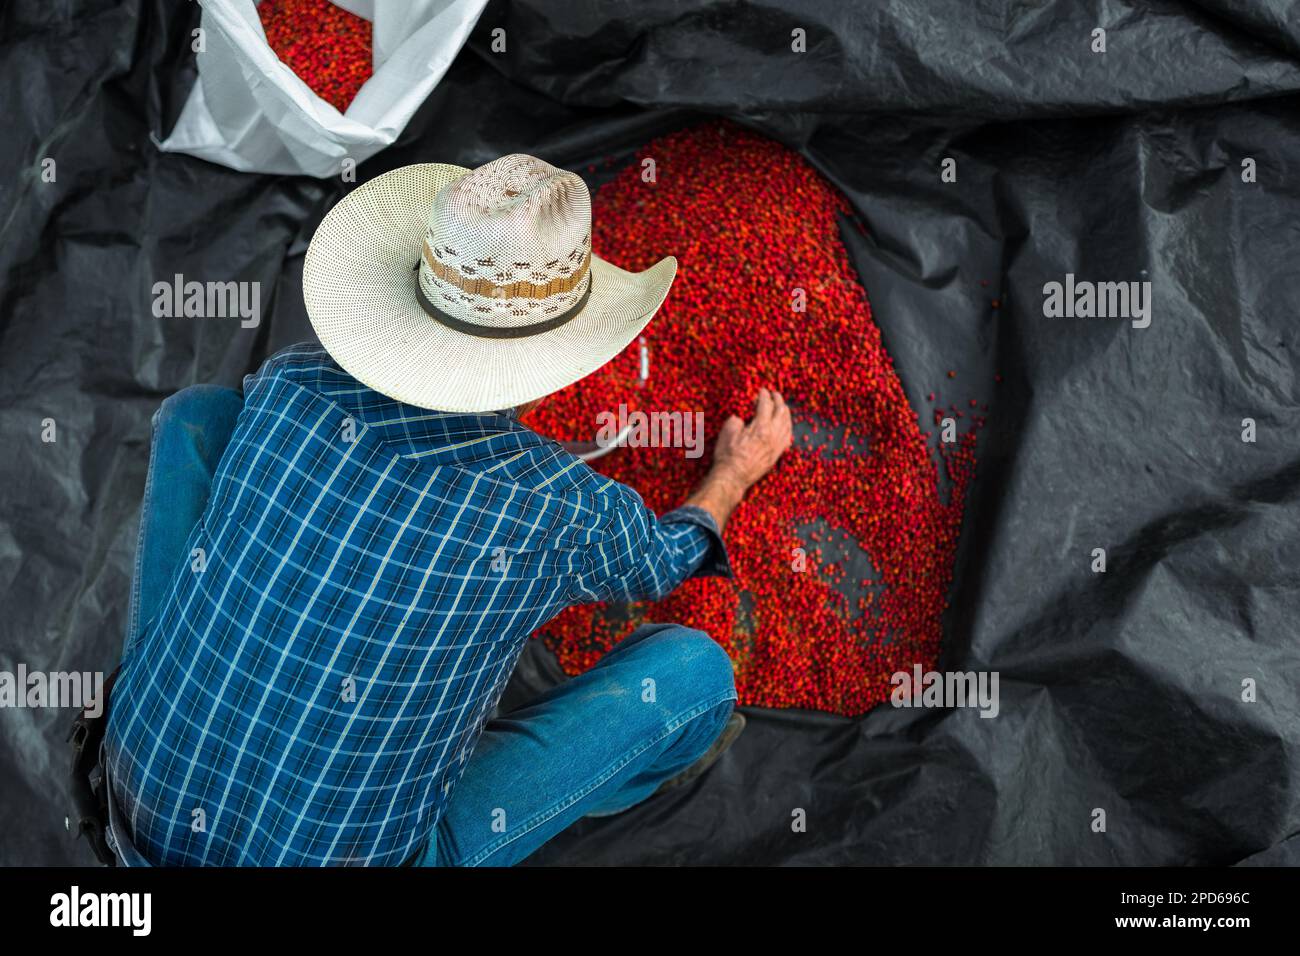 A Mexican rancher collects sun-dried chiltepin peppers, a wild variety of chili pepper, into a sack on a farm near Baviácora, Sonora, Mexico. Stock Photo